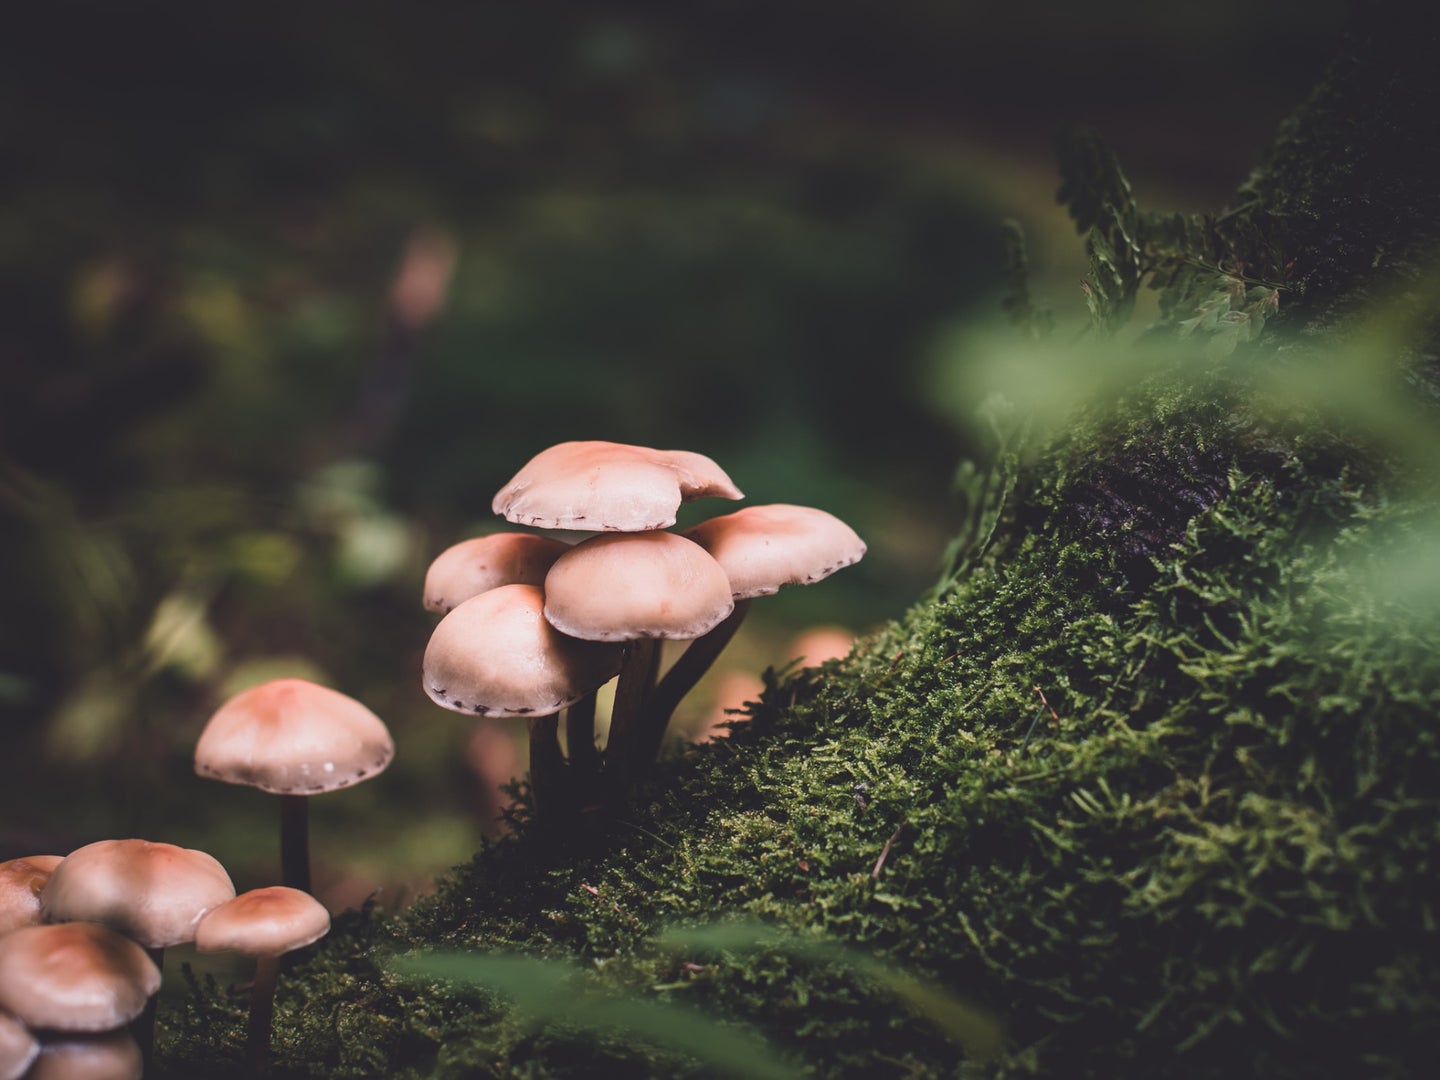 Brown mushrooms growing on a green, mossy surface.